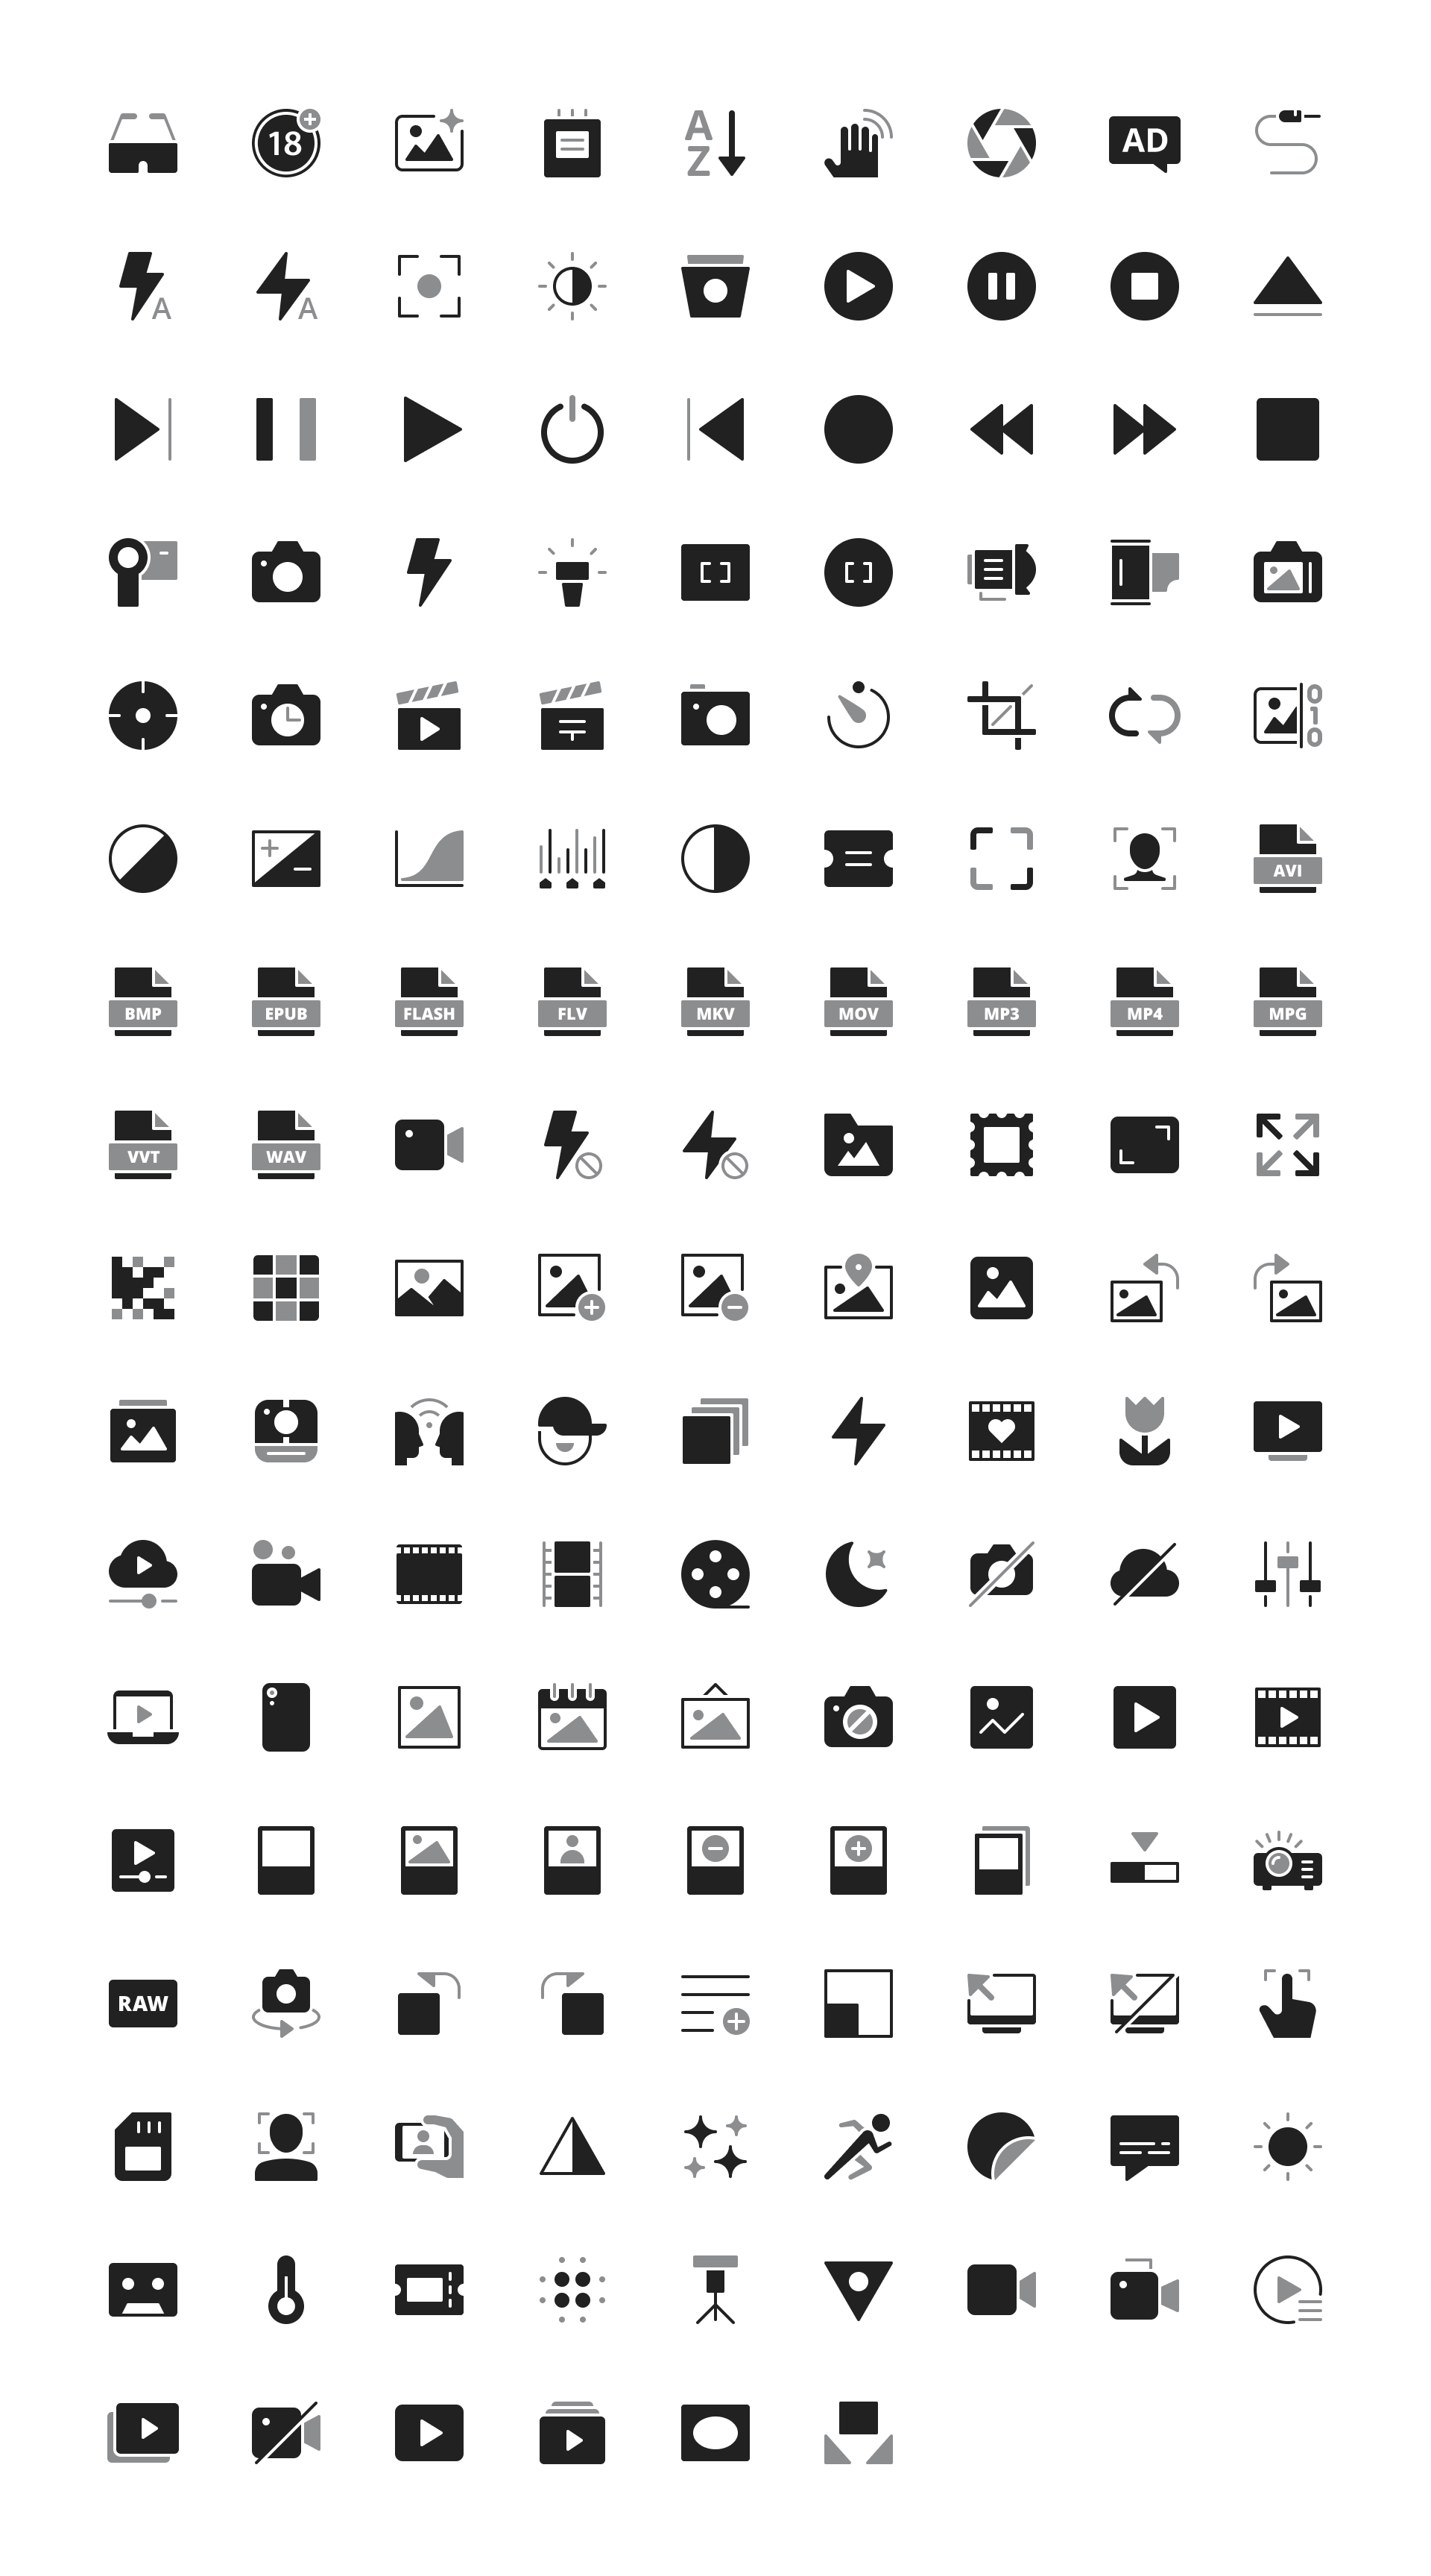 Photography and Video Icons